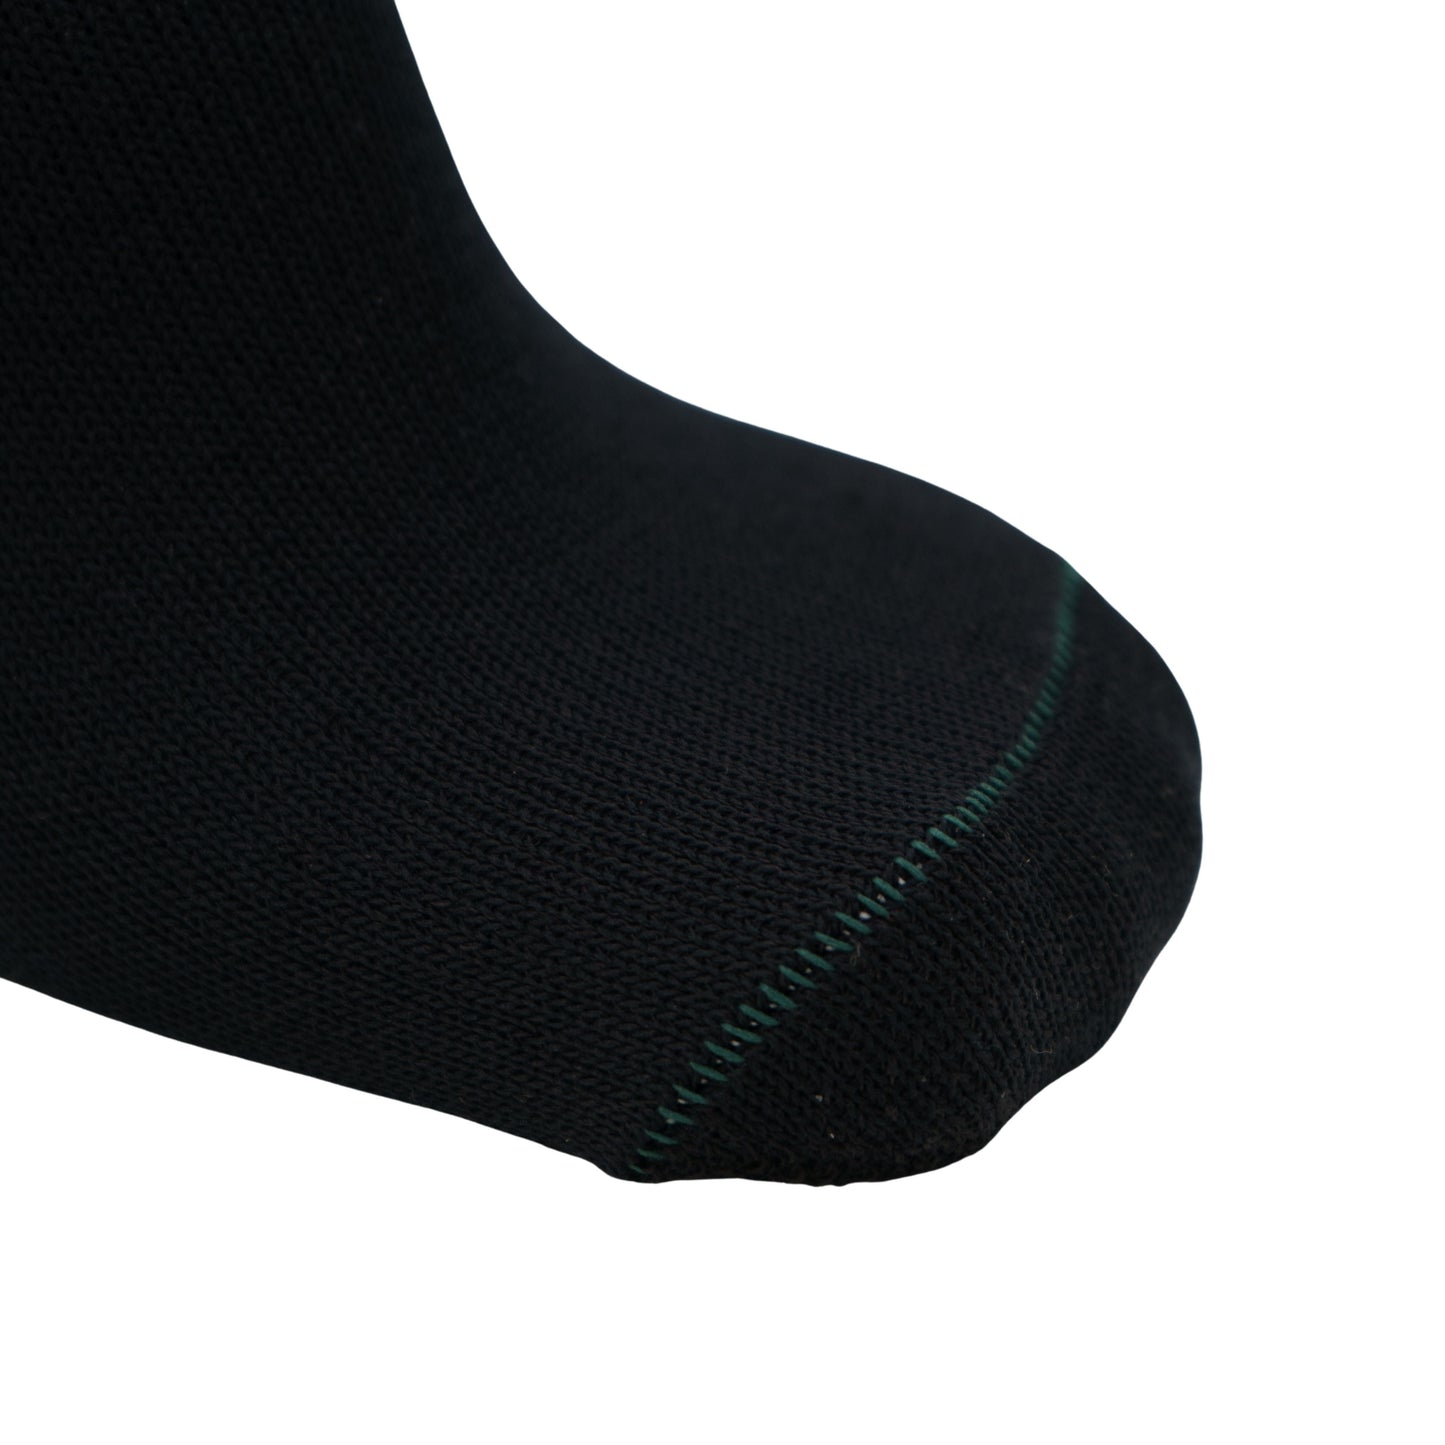 FOUNDATION® SOFTSTEP® DIABETIC ACTIVE CREW SOCKS - NATURAL